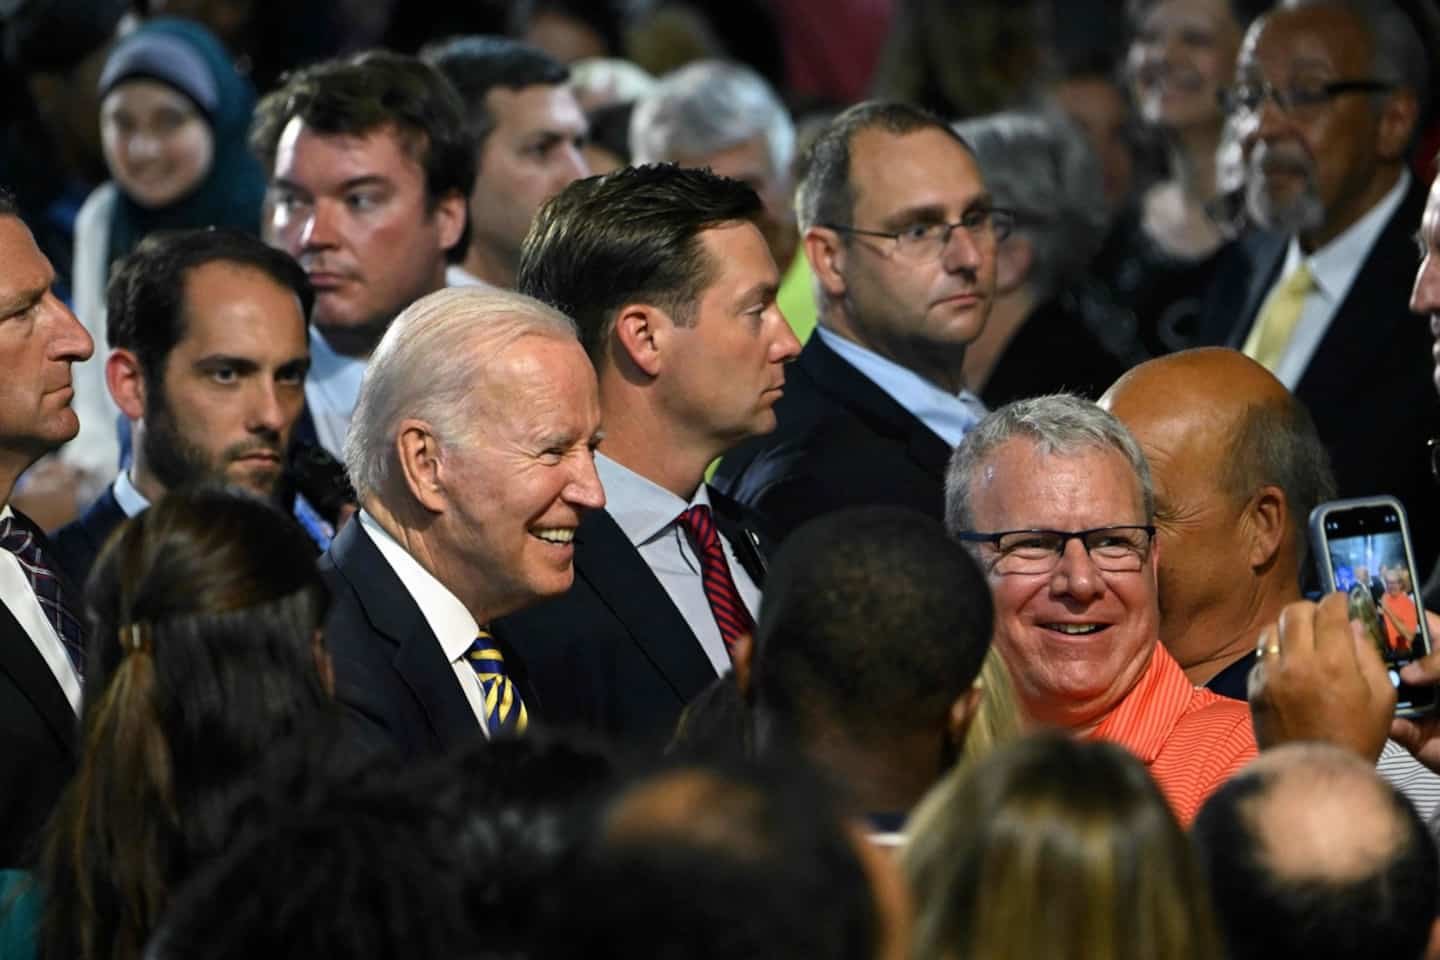 Biden offers himself some respite in Ohio, surrounded by the working class he loves